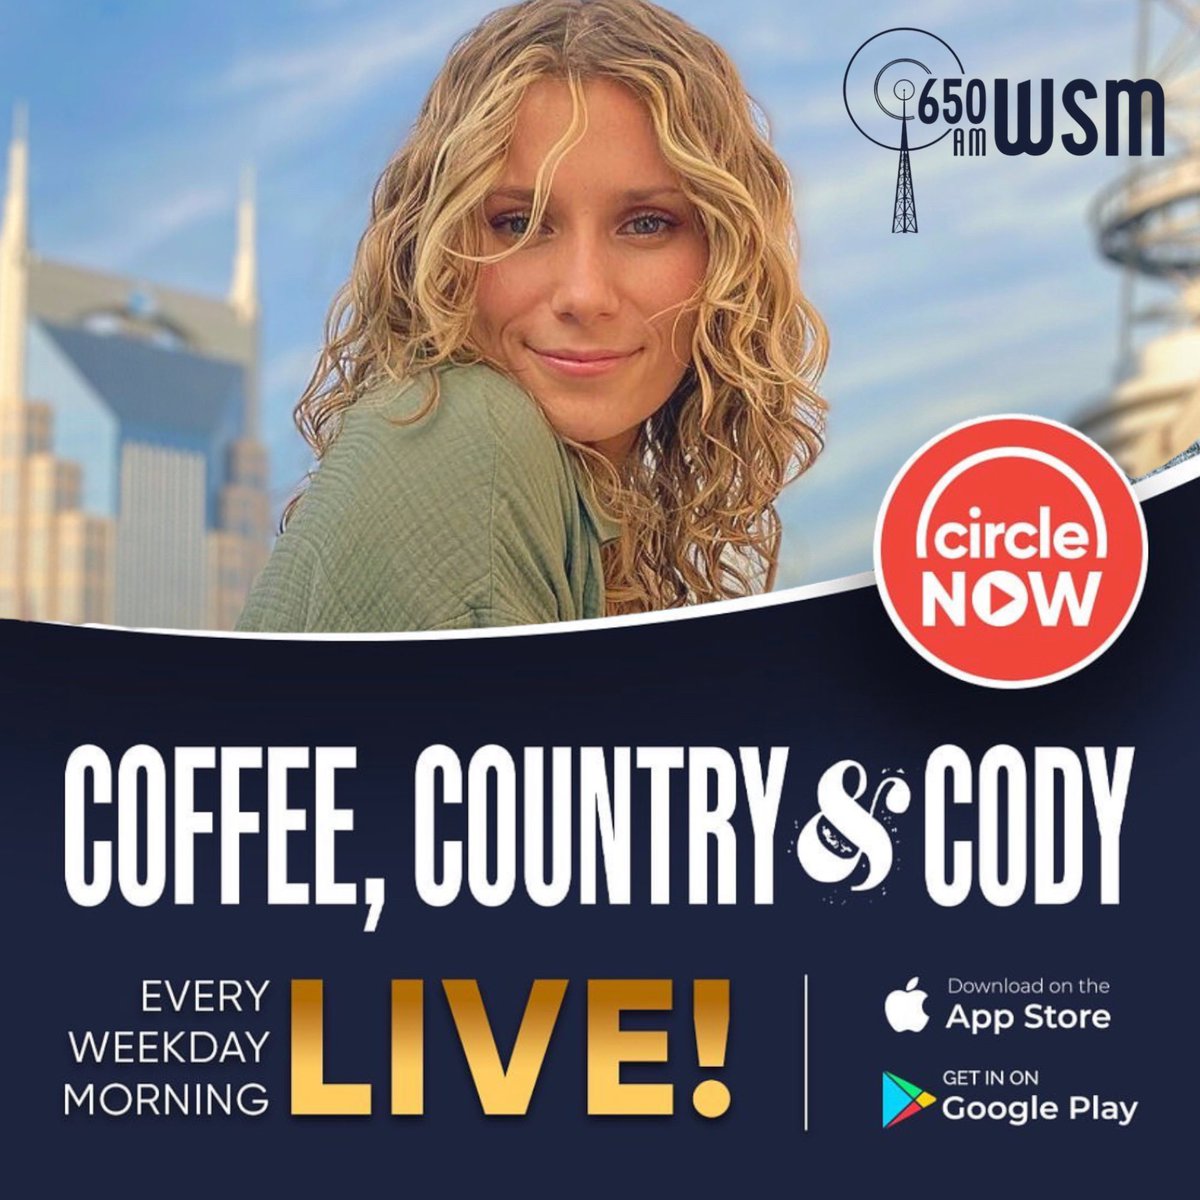 Thrilled for a little Monday morning music at 8am on WSM’s Coffee, Country & Cody!🌞☕Tune in to hear about my EP 'Waves' & catch a sneak peek of some new music!💛🎶

The show's on demand on the Circle App for a 24 hours afterwards☕📺

#CircleNow #CoffeeCountryCody #Opry